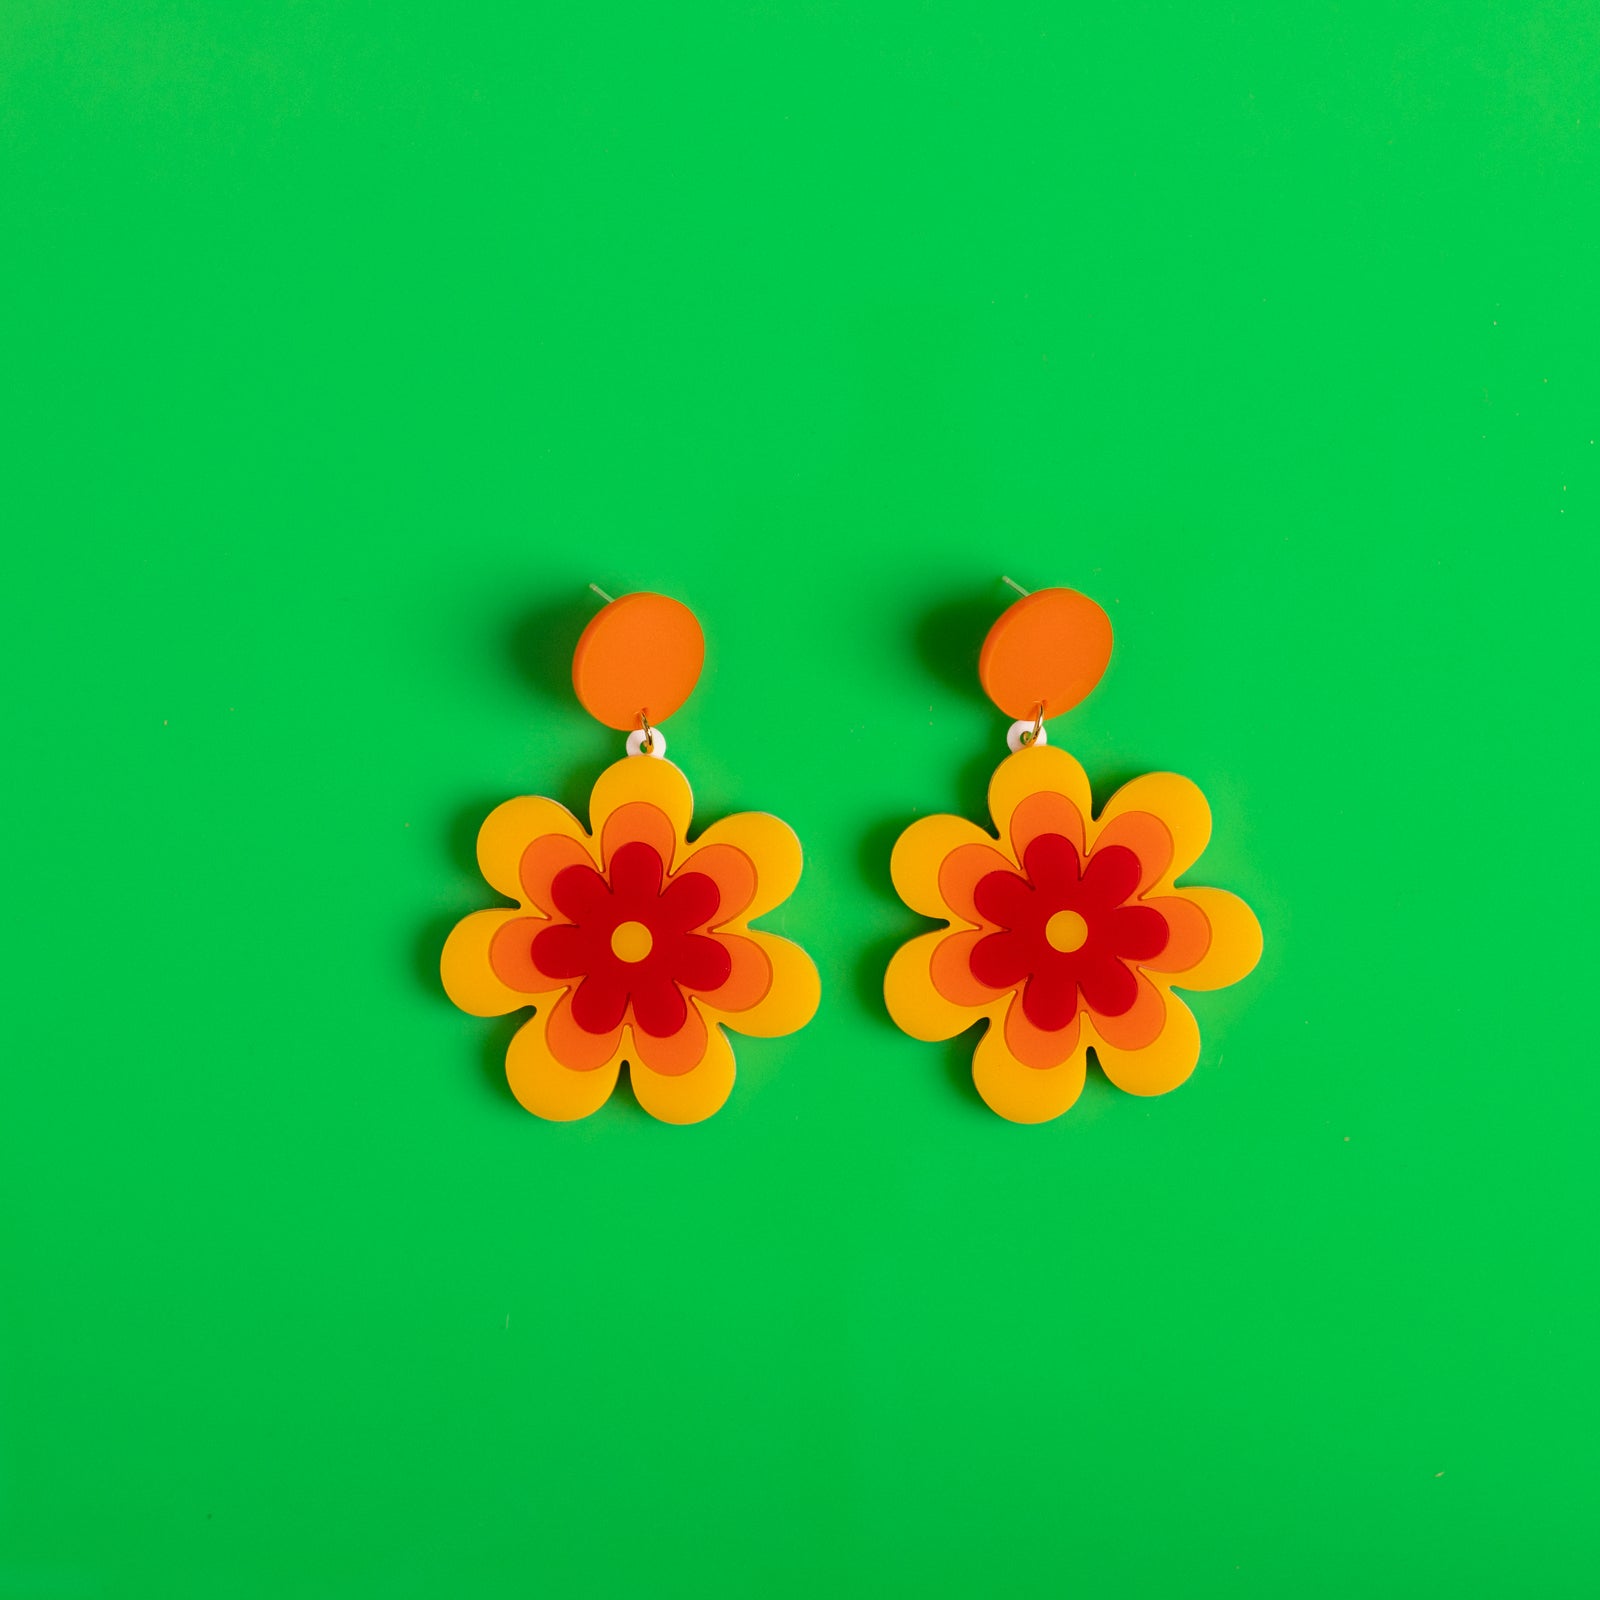 The Candy Daisy Hanging Stud Earrings